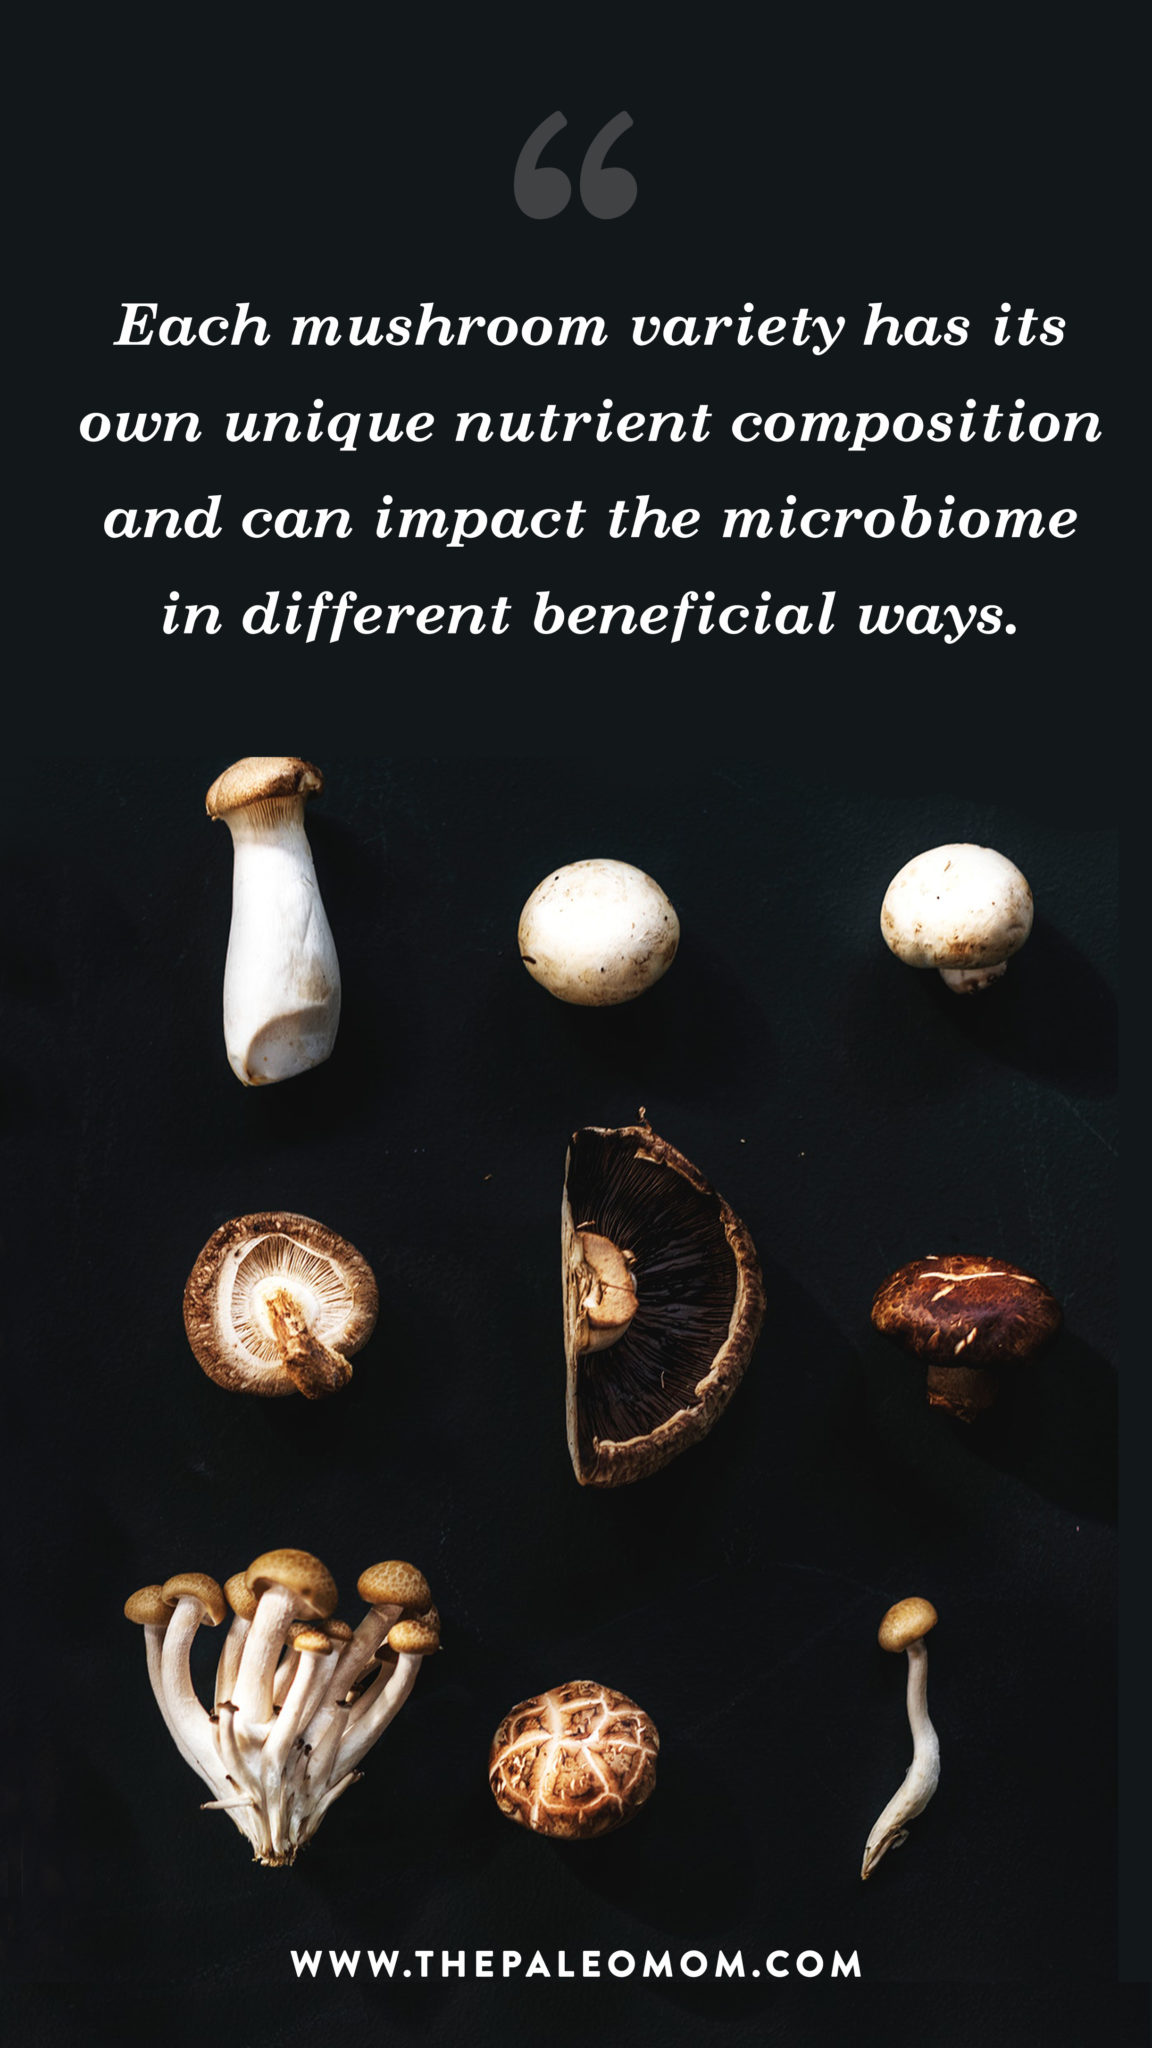 Each mushroom variety has its own unique nutrient composition and can impact the microbiome in different beneficial ways.